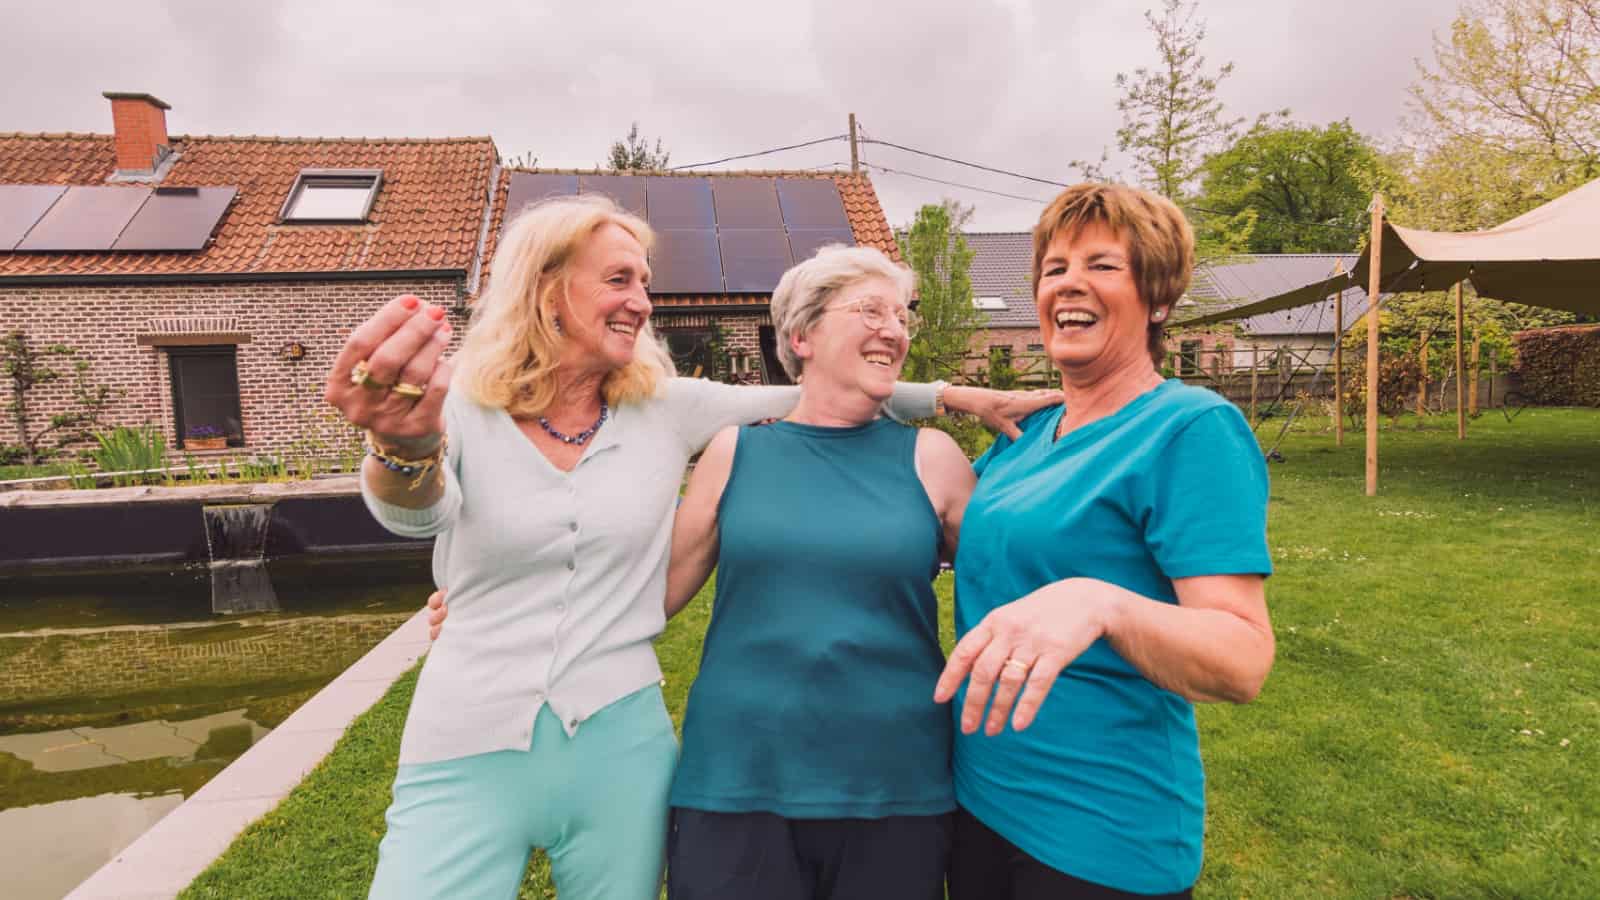 Three older women outside in a courtyard amongst suburban houses.